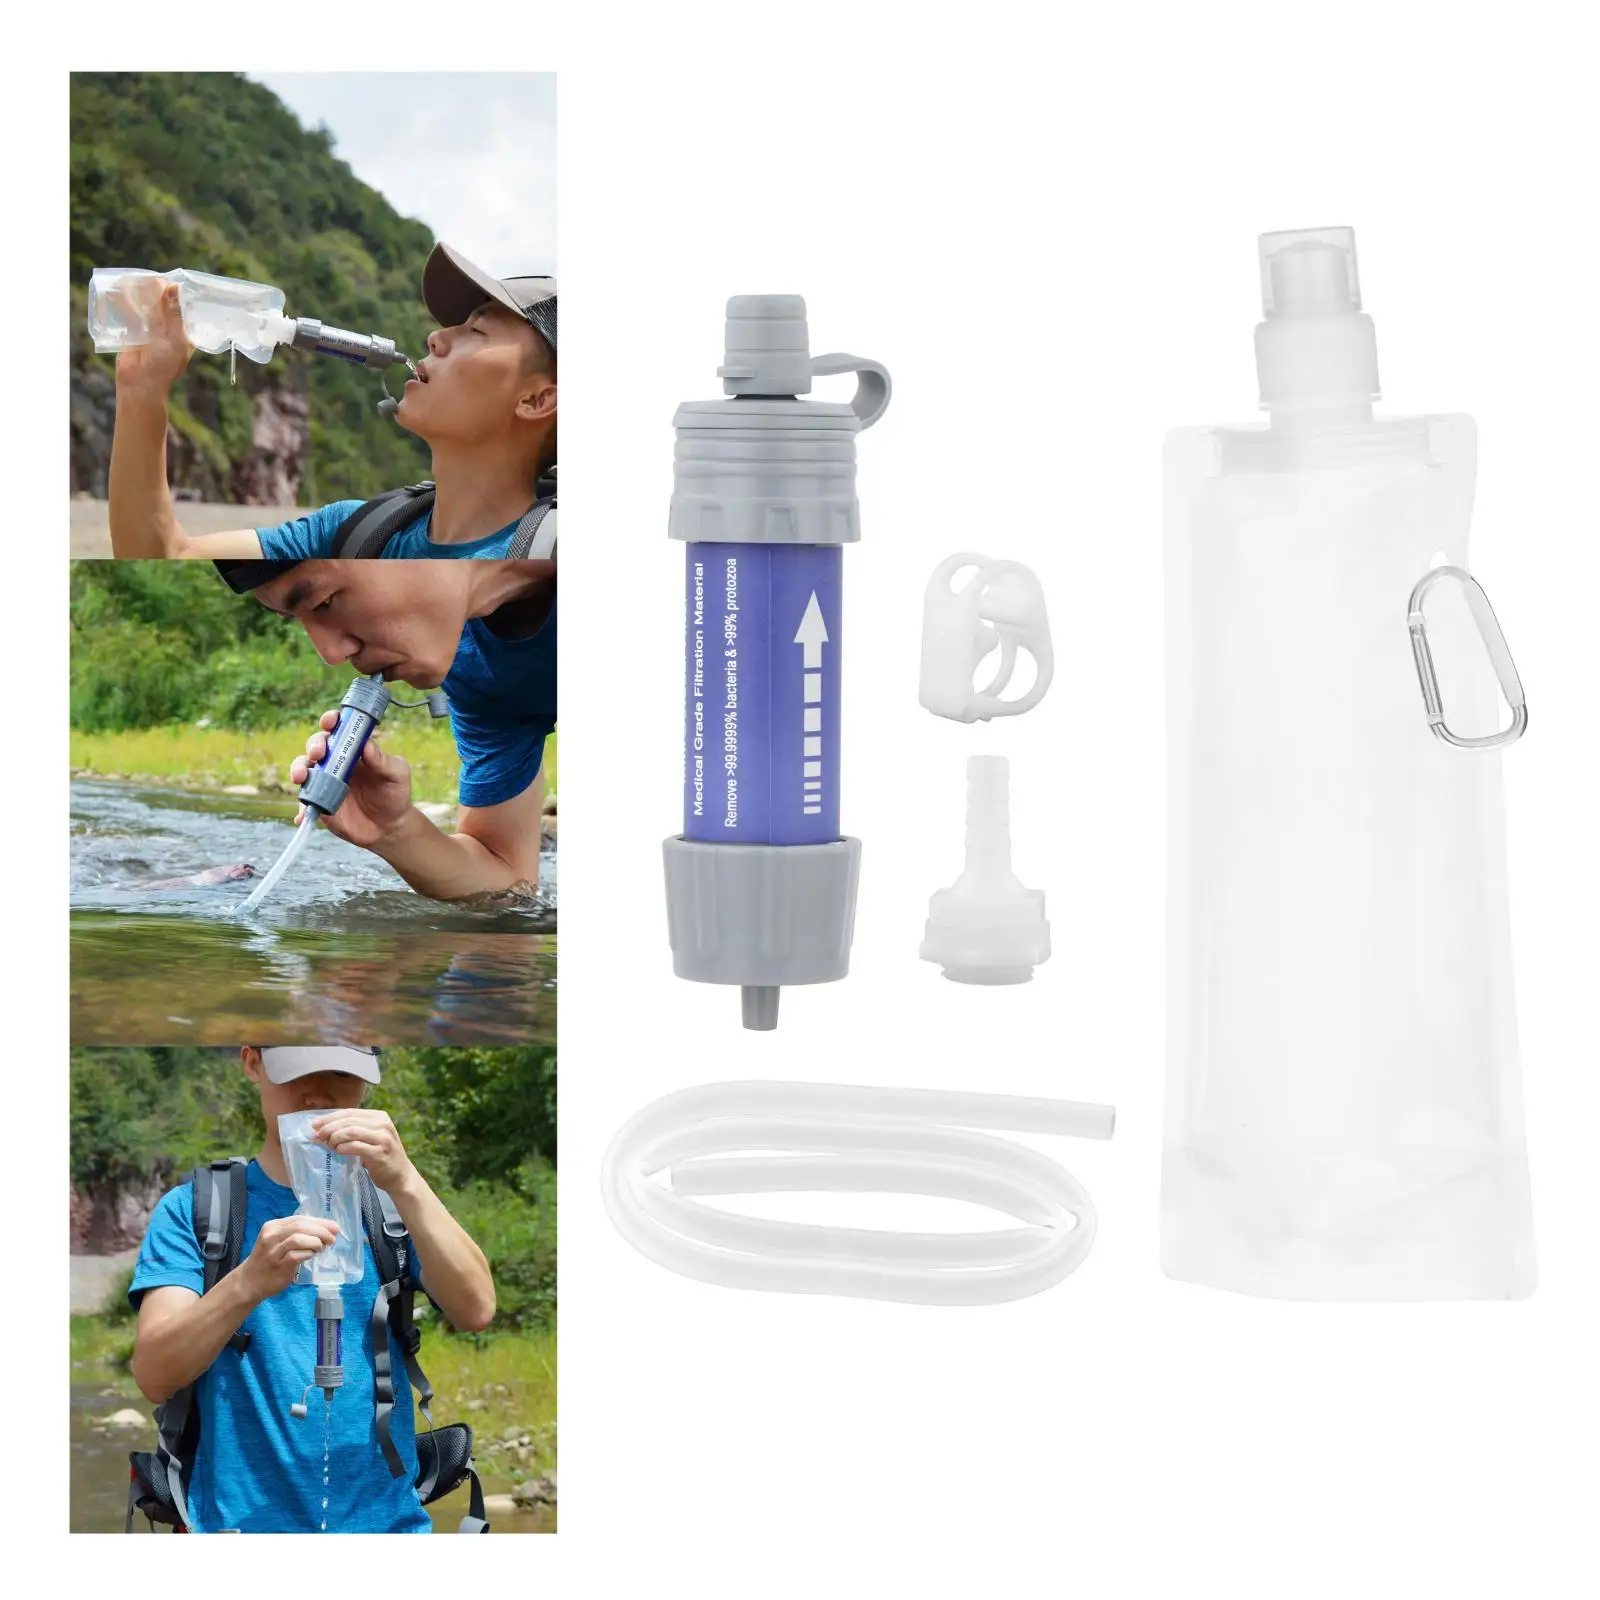 Portable Water Filter Straw Kit Outdoor Water Filter Personal for Emergency